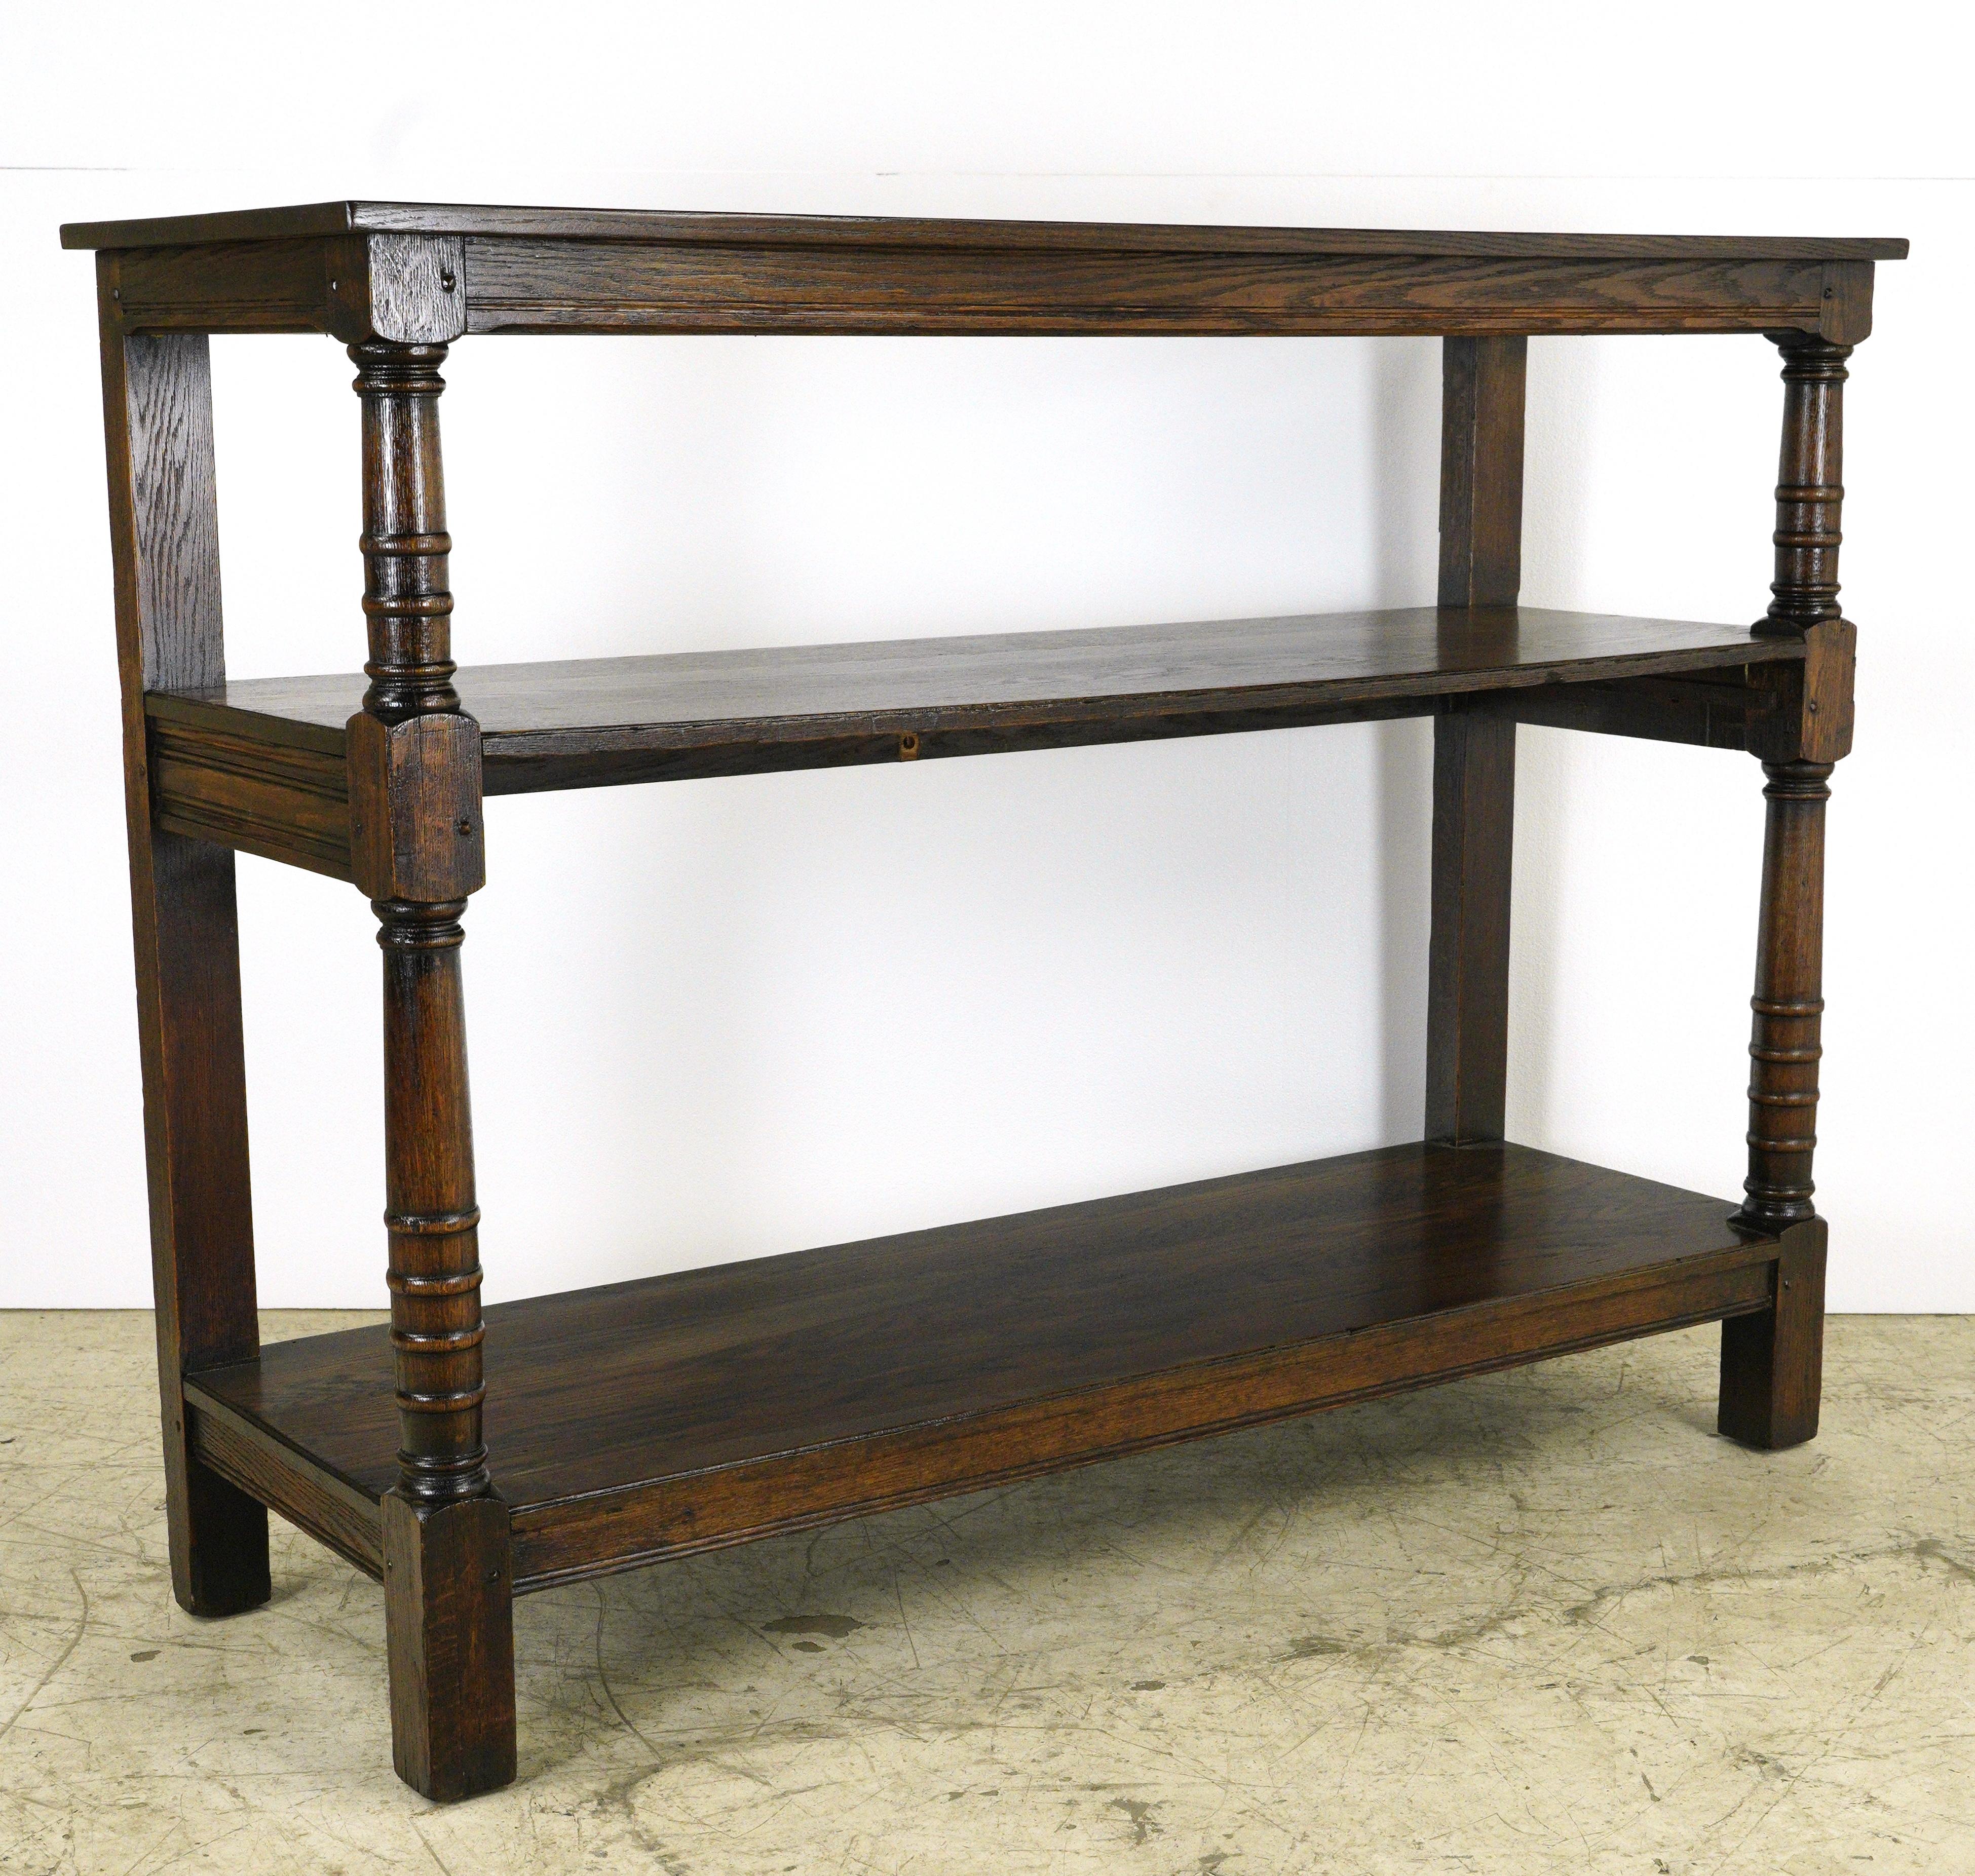 3 Tier Oak Shelf Unit from Union Theological Seminary in Manhattan In Good Condition For Sale In New York, NY